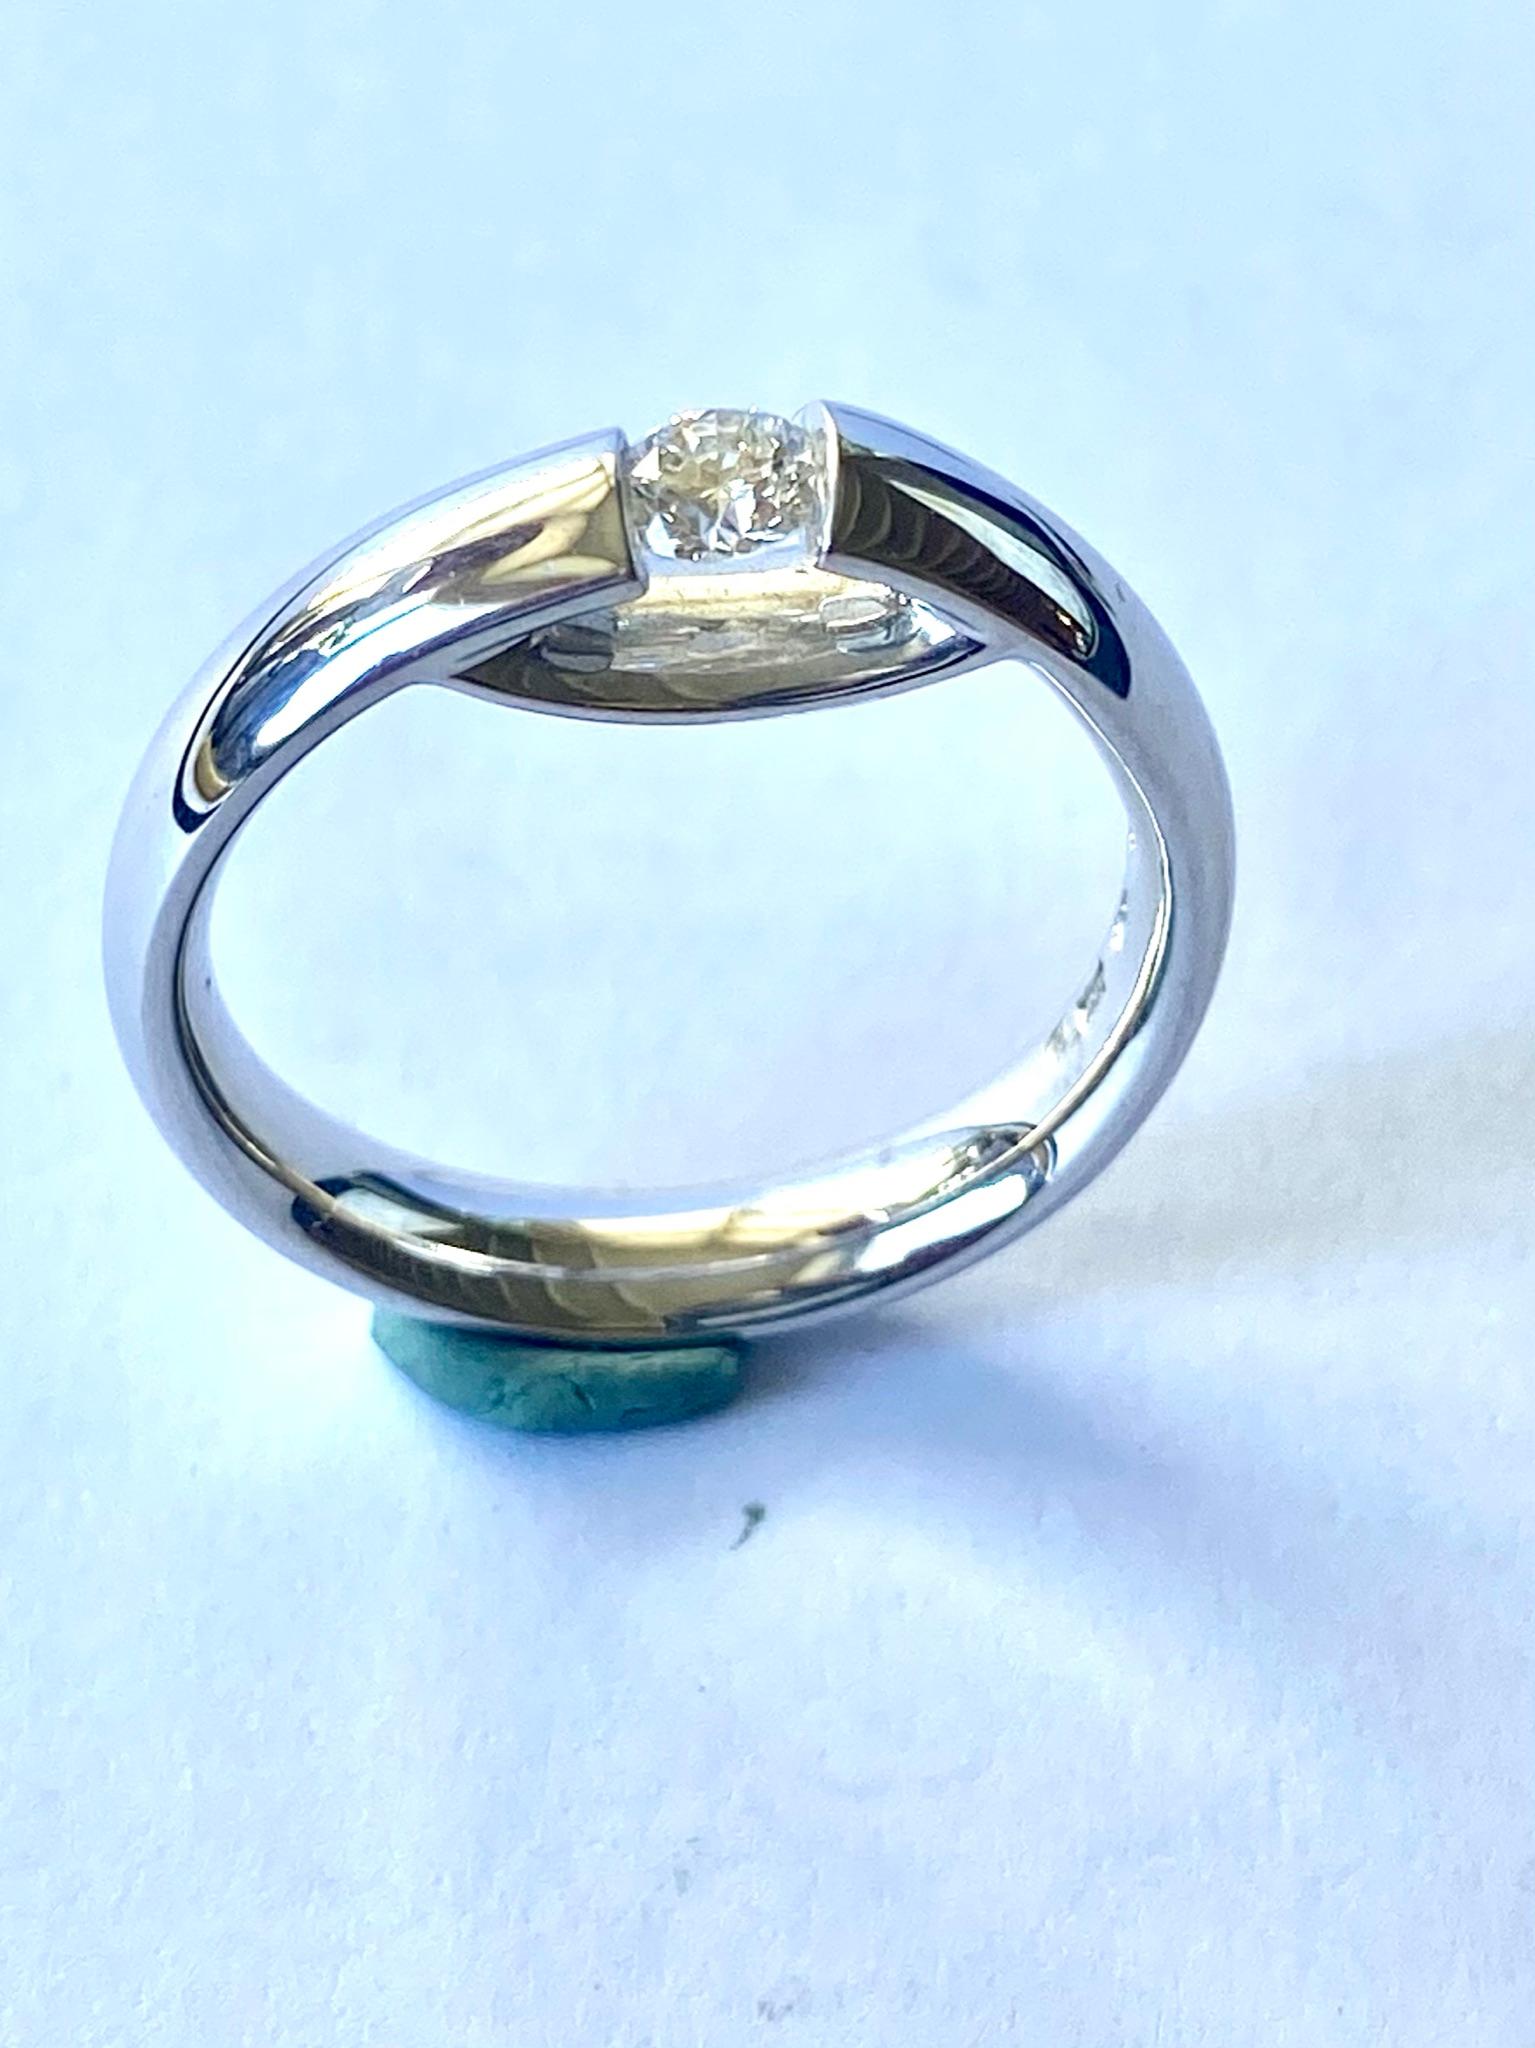 One (1) 18K. White Gold Ring , stamped: 750 & Georg Jensen.
Set woth one (1) Round Brilliant Cut Natural Diamond = 0.22 ct VVS-F
Total Weight± 6.68 grams.
Size ±  17,25 (54)  USA (7)  UK: N   (attention: Size can not be changed)
This Original Georg